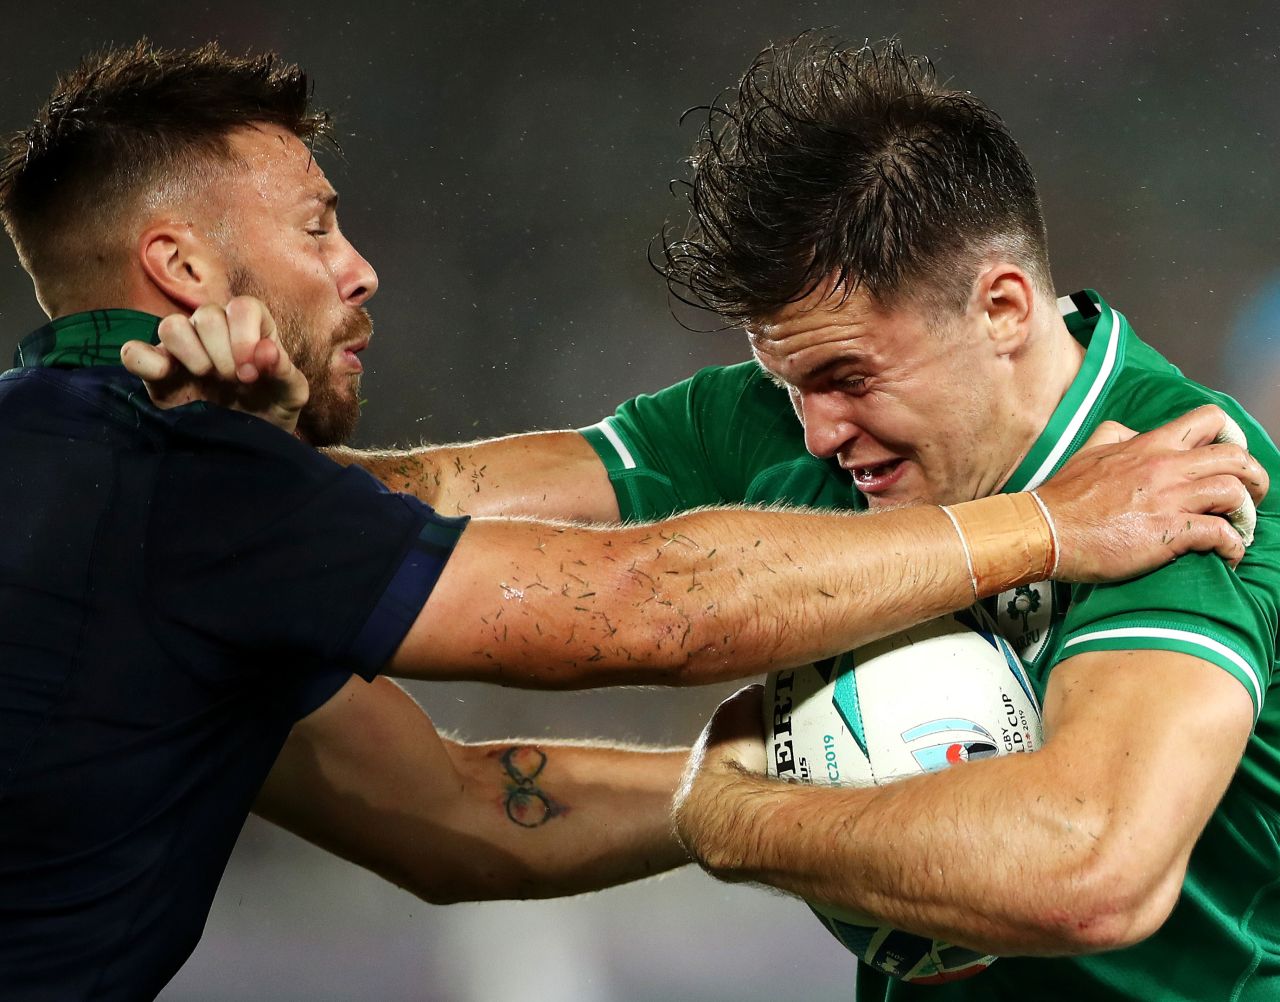 Ireland proved to be too strong for its opponents who failed to match the Irish intensity.